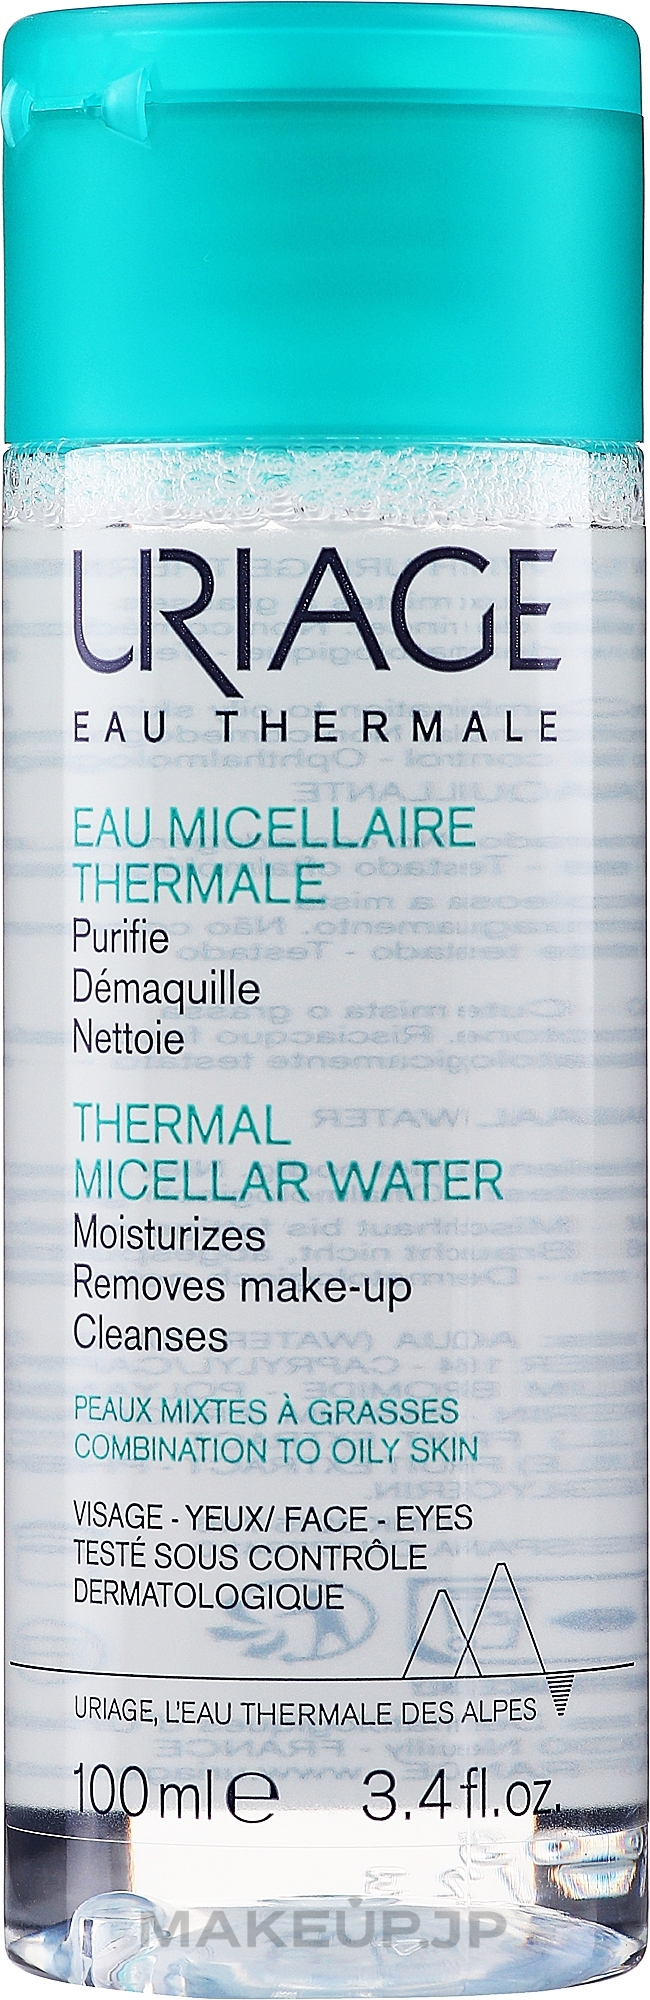 Micellar Water - Uriage Eau Micellaire Thermale Remove Make-up — photo 100 ml